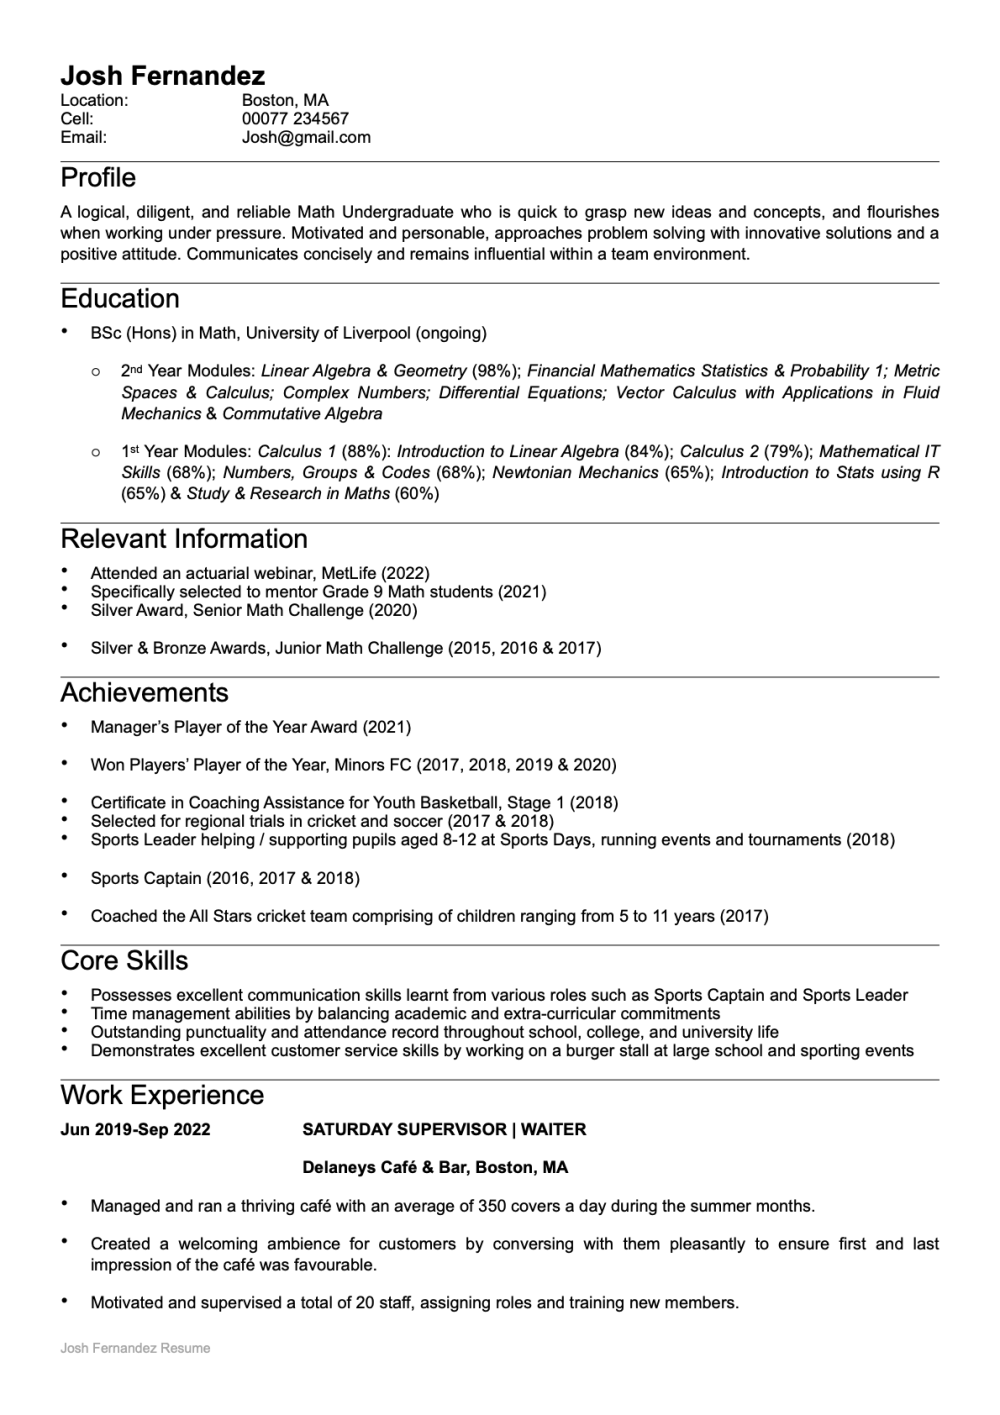 resume with no work experience or education